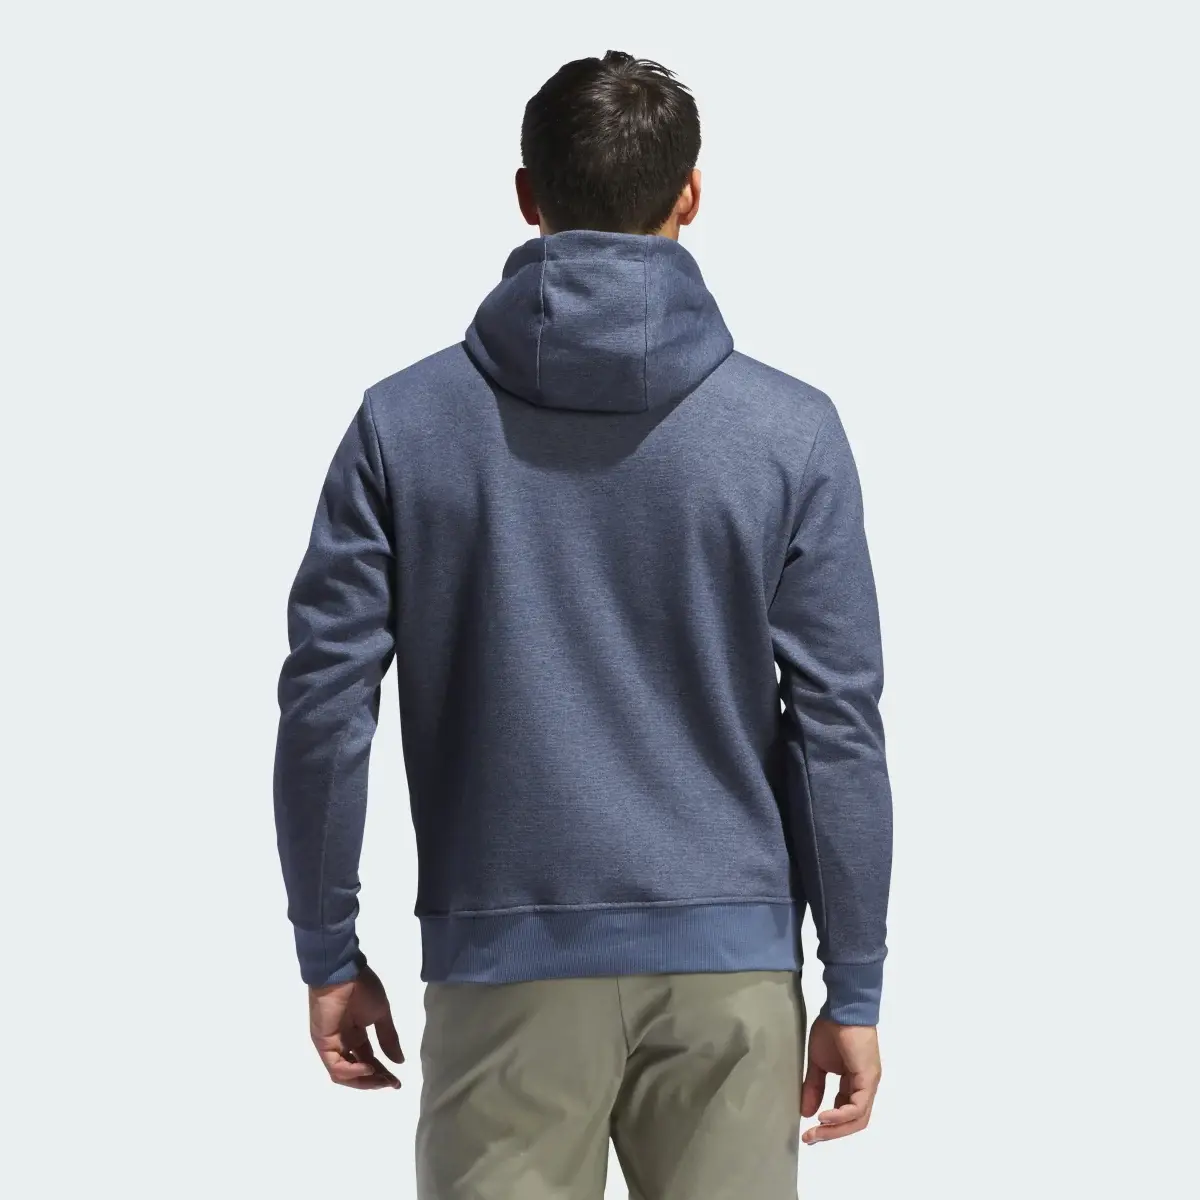 Adidas Go-To Hoodie. 3